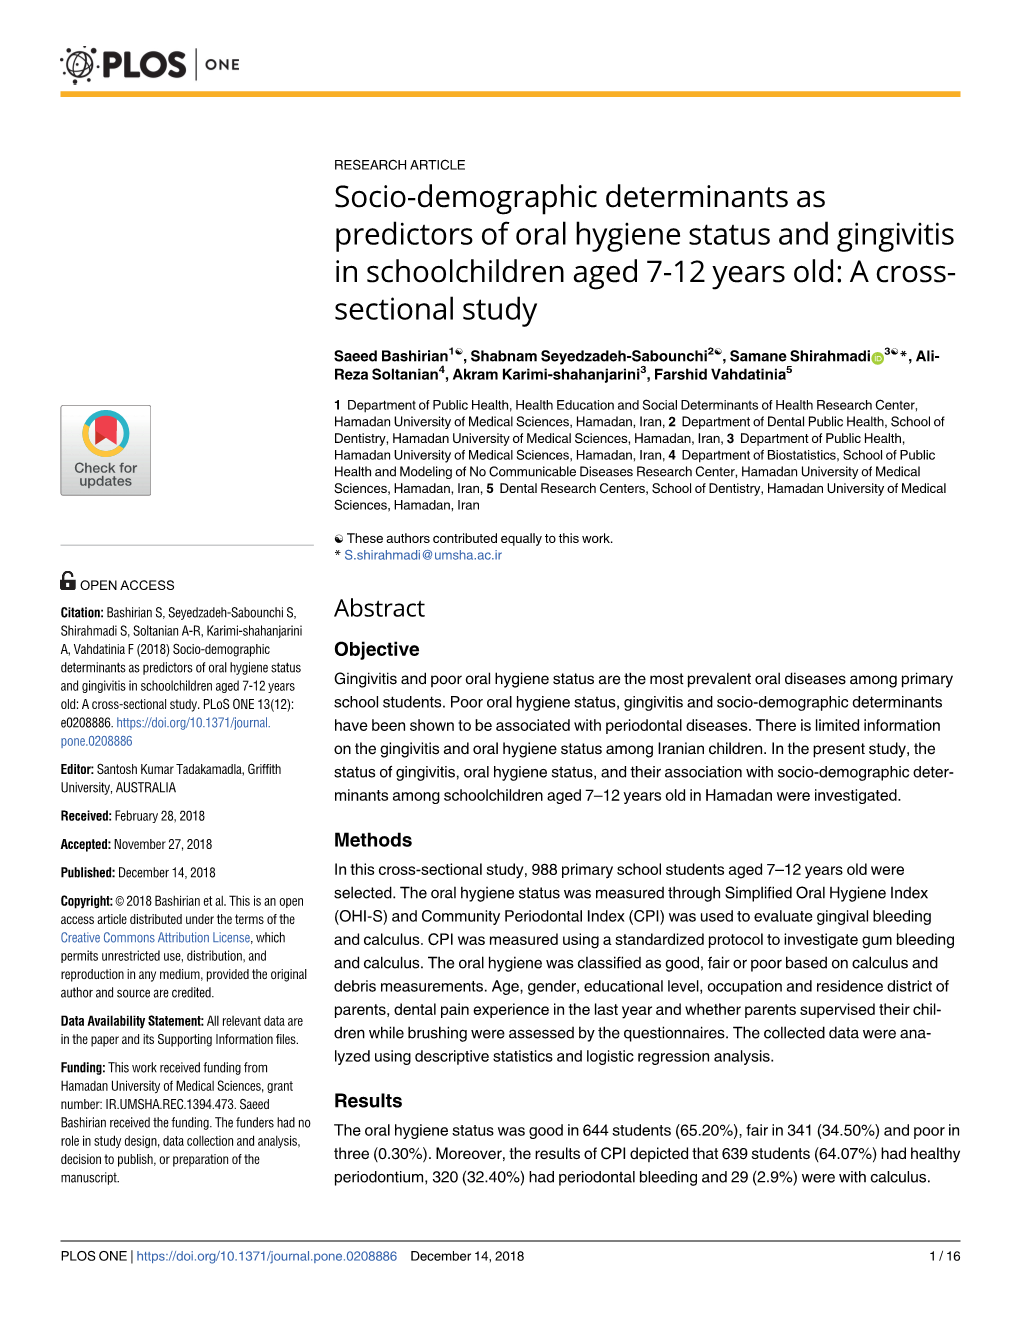 Socio-Demographic Determinants As Predictors of Oral Hygiene Status and Gingivitis in Schoolchildren Aged 7-12 Years Old: a Cross- Sectional Study